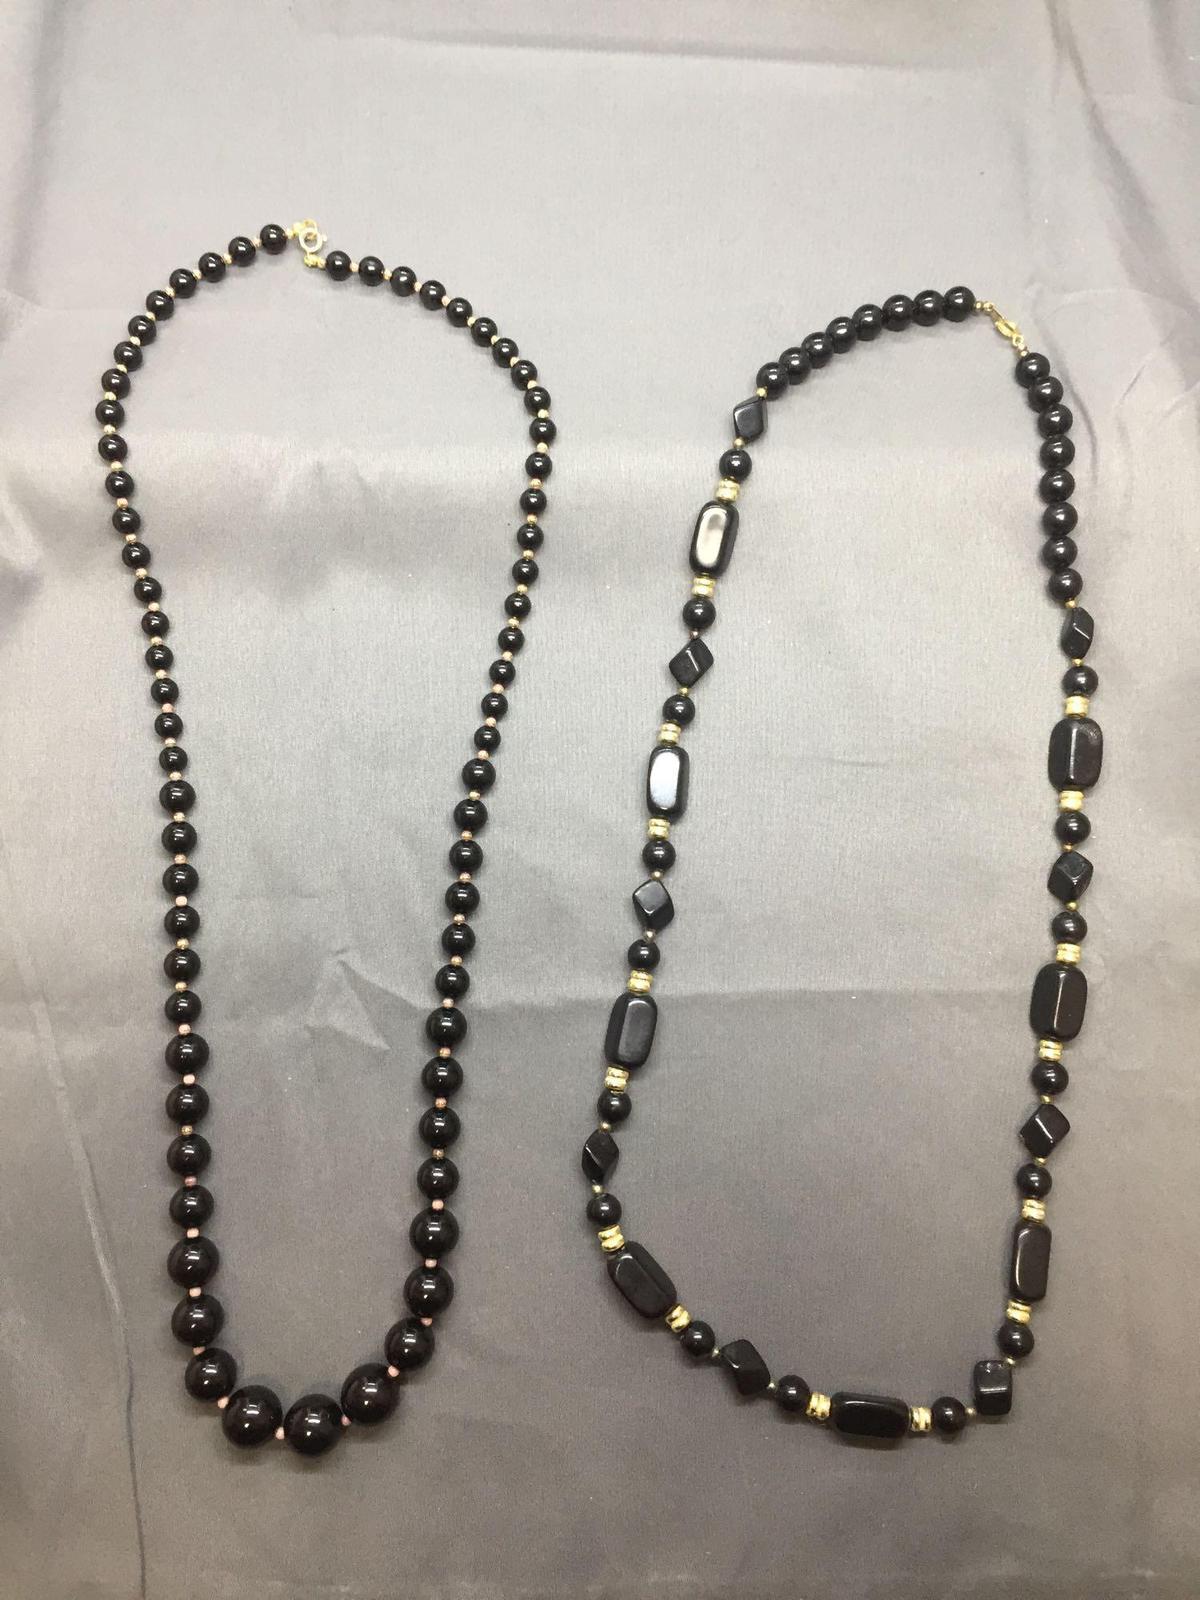 Lot of Two Alternating Black & Gold-Tone Bead Hand-Strung Fashion Necklaces, One 32in & One 30in